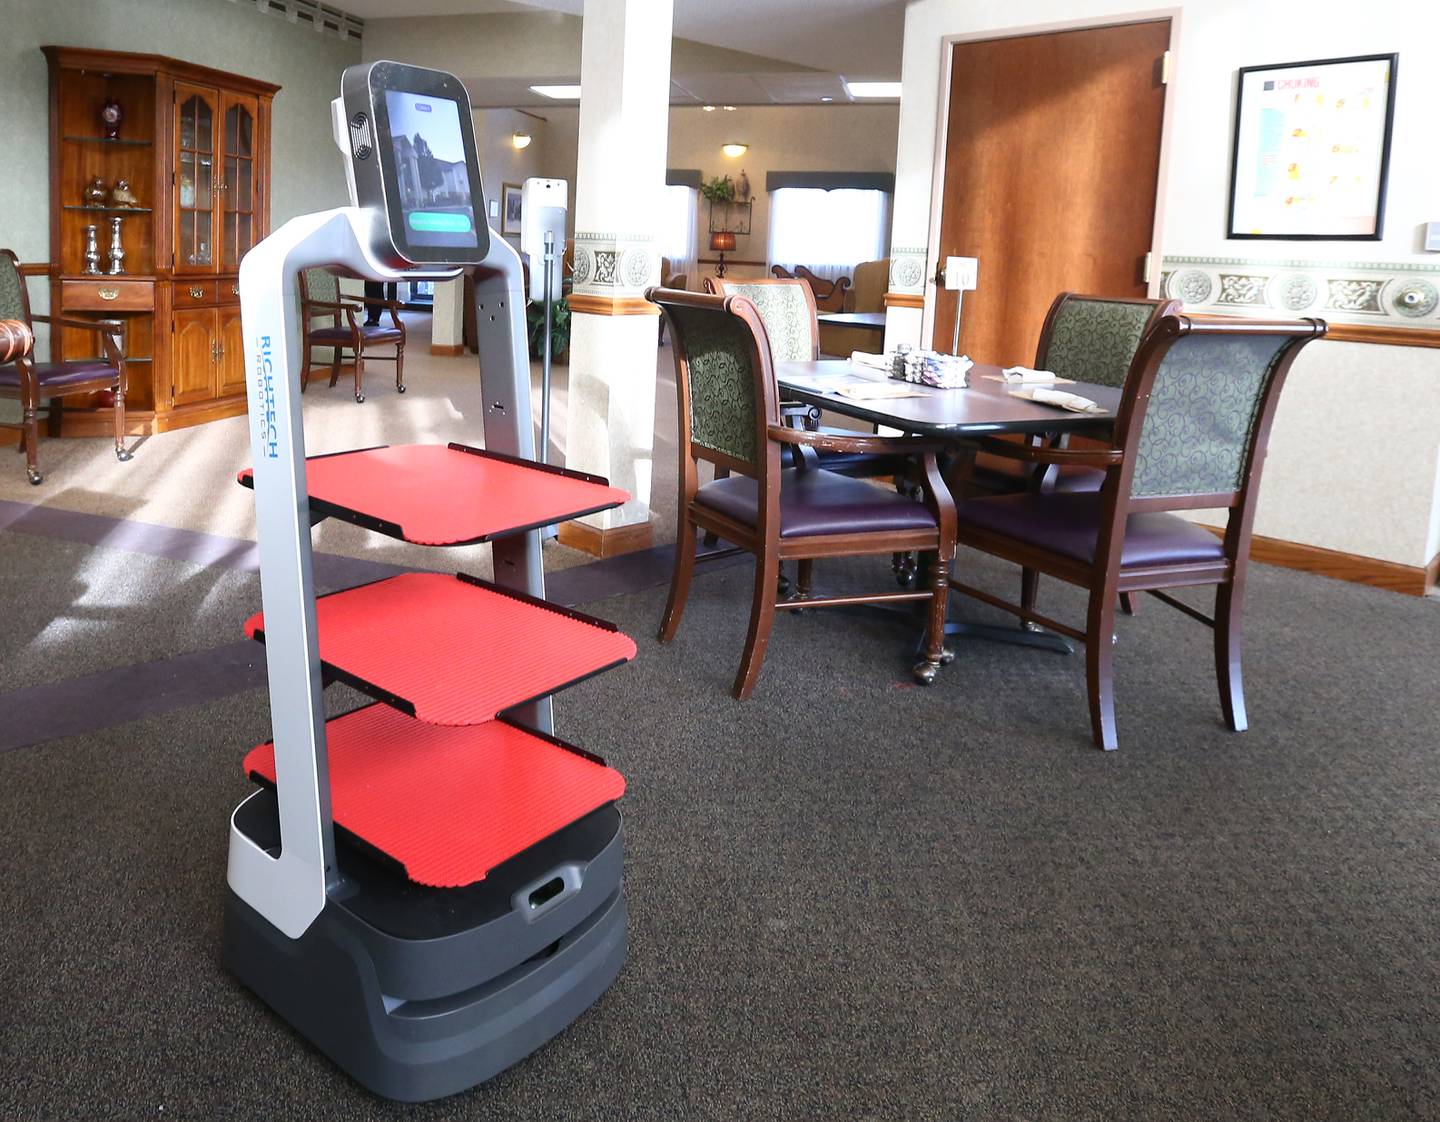 Rosie the robot roams around the dining area at Heritage Woods assisted living on Tuesday Jan. 11, 2022 in Ottawa. The robot has obstacle avoidance that will prevent any accidents as it delivers meals throughout the facility.